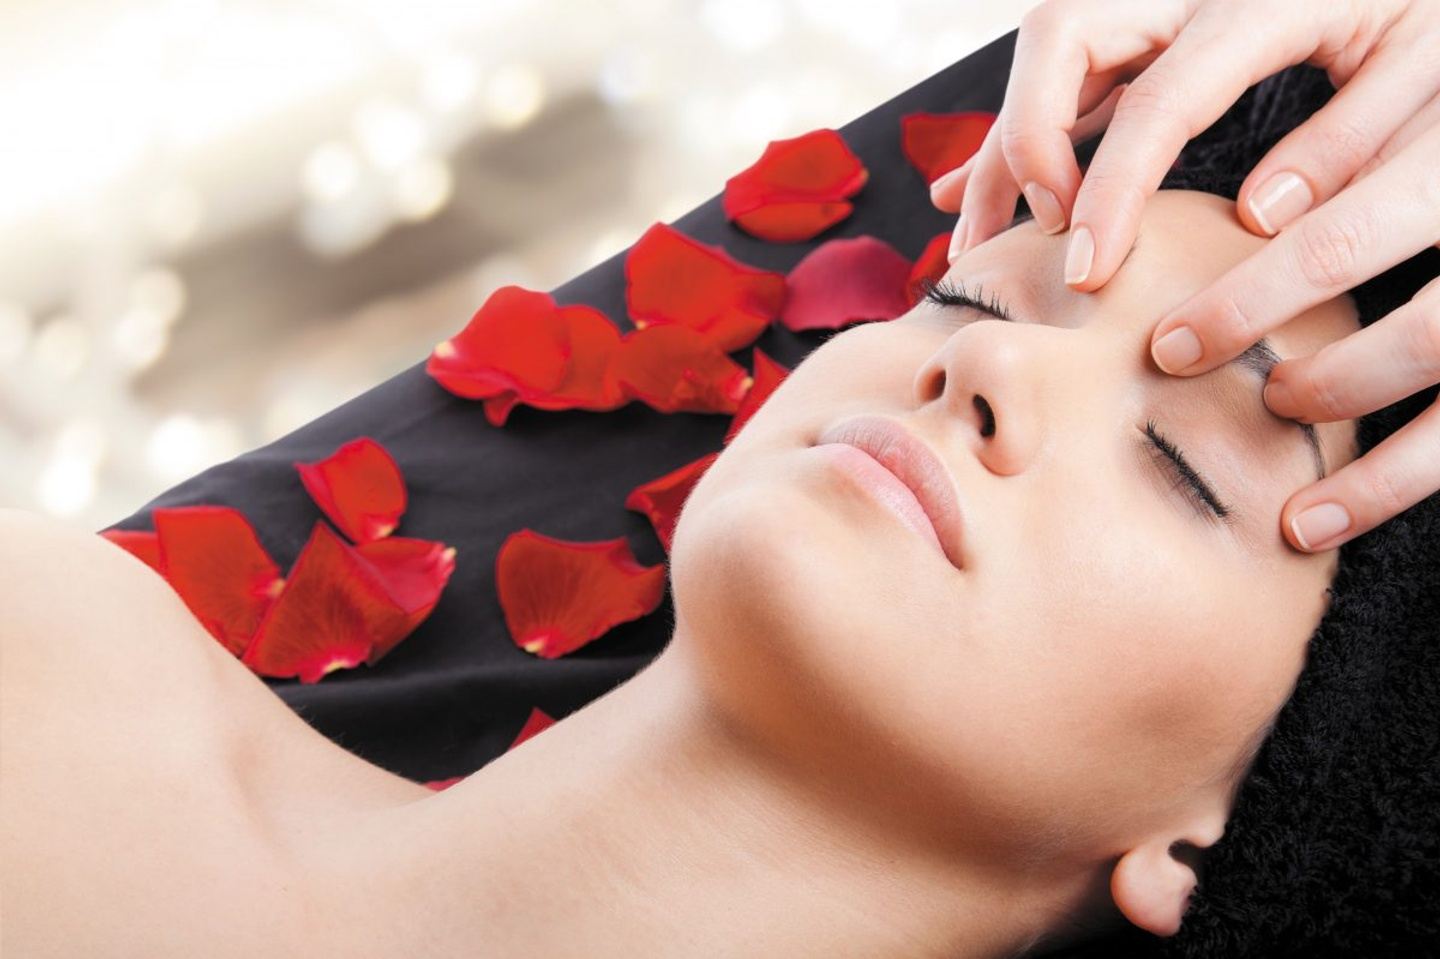 New Year New You - Indulgent Pampering & Relaxation 5 days